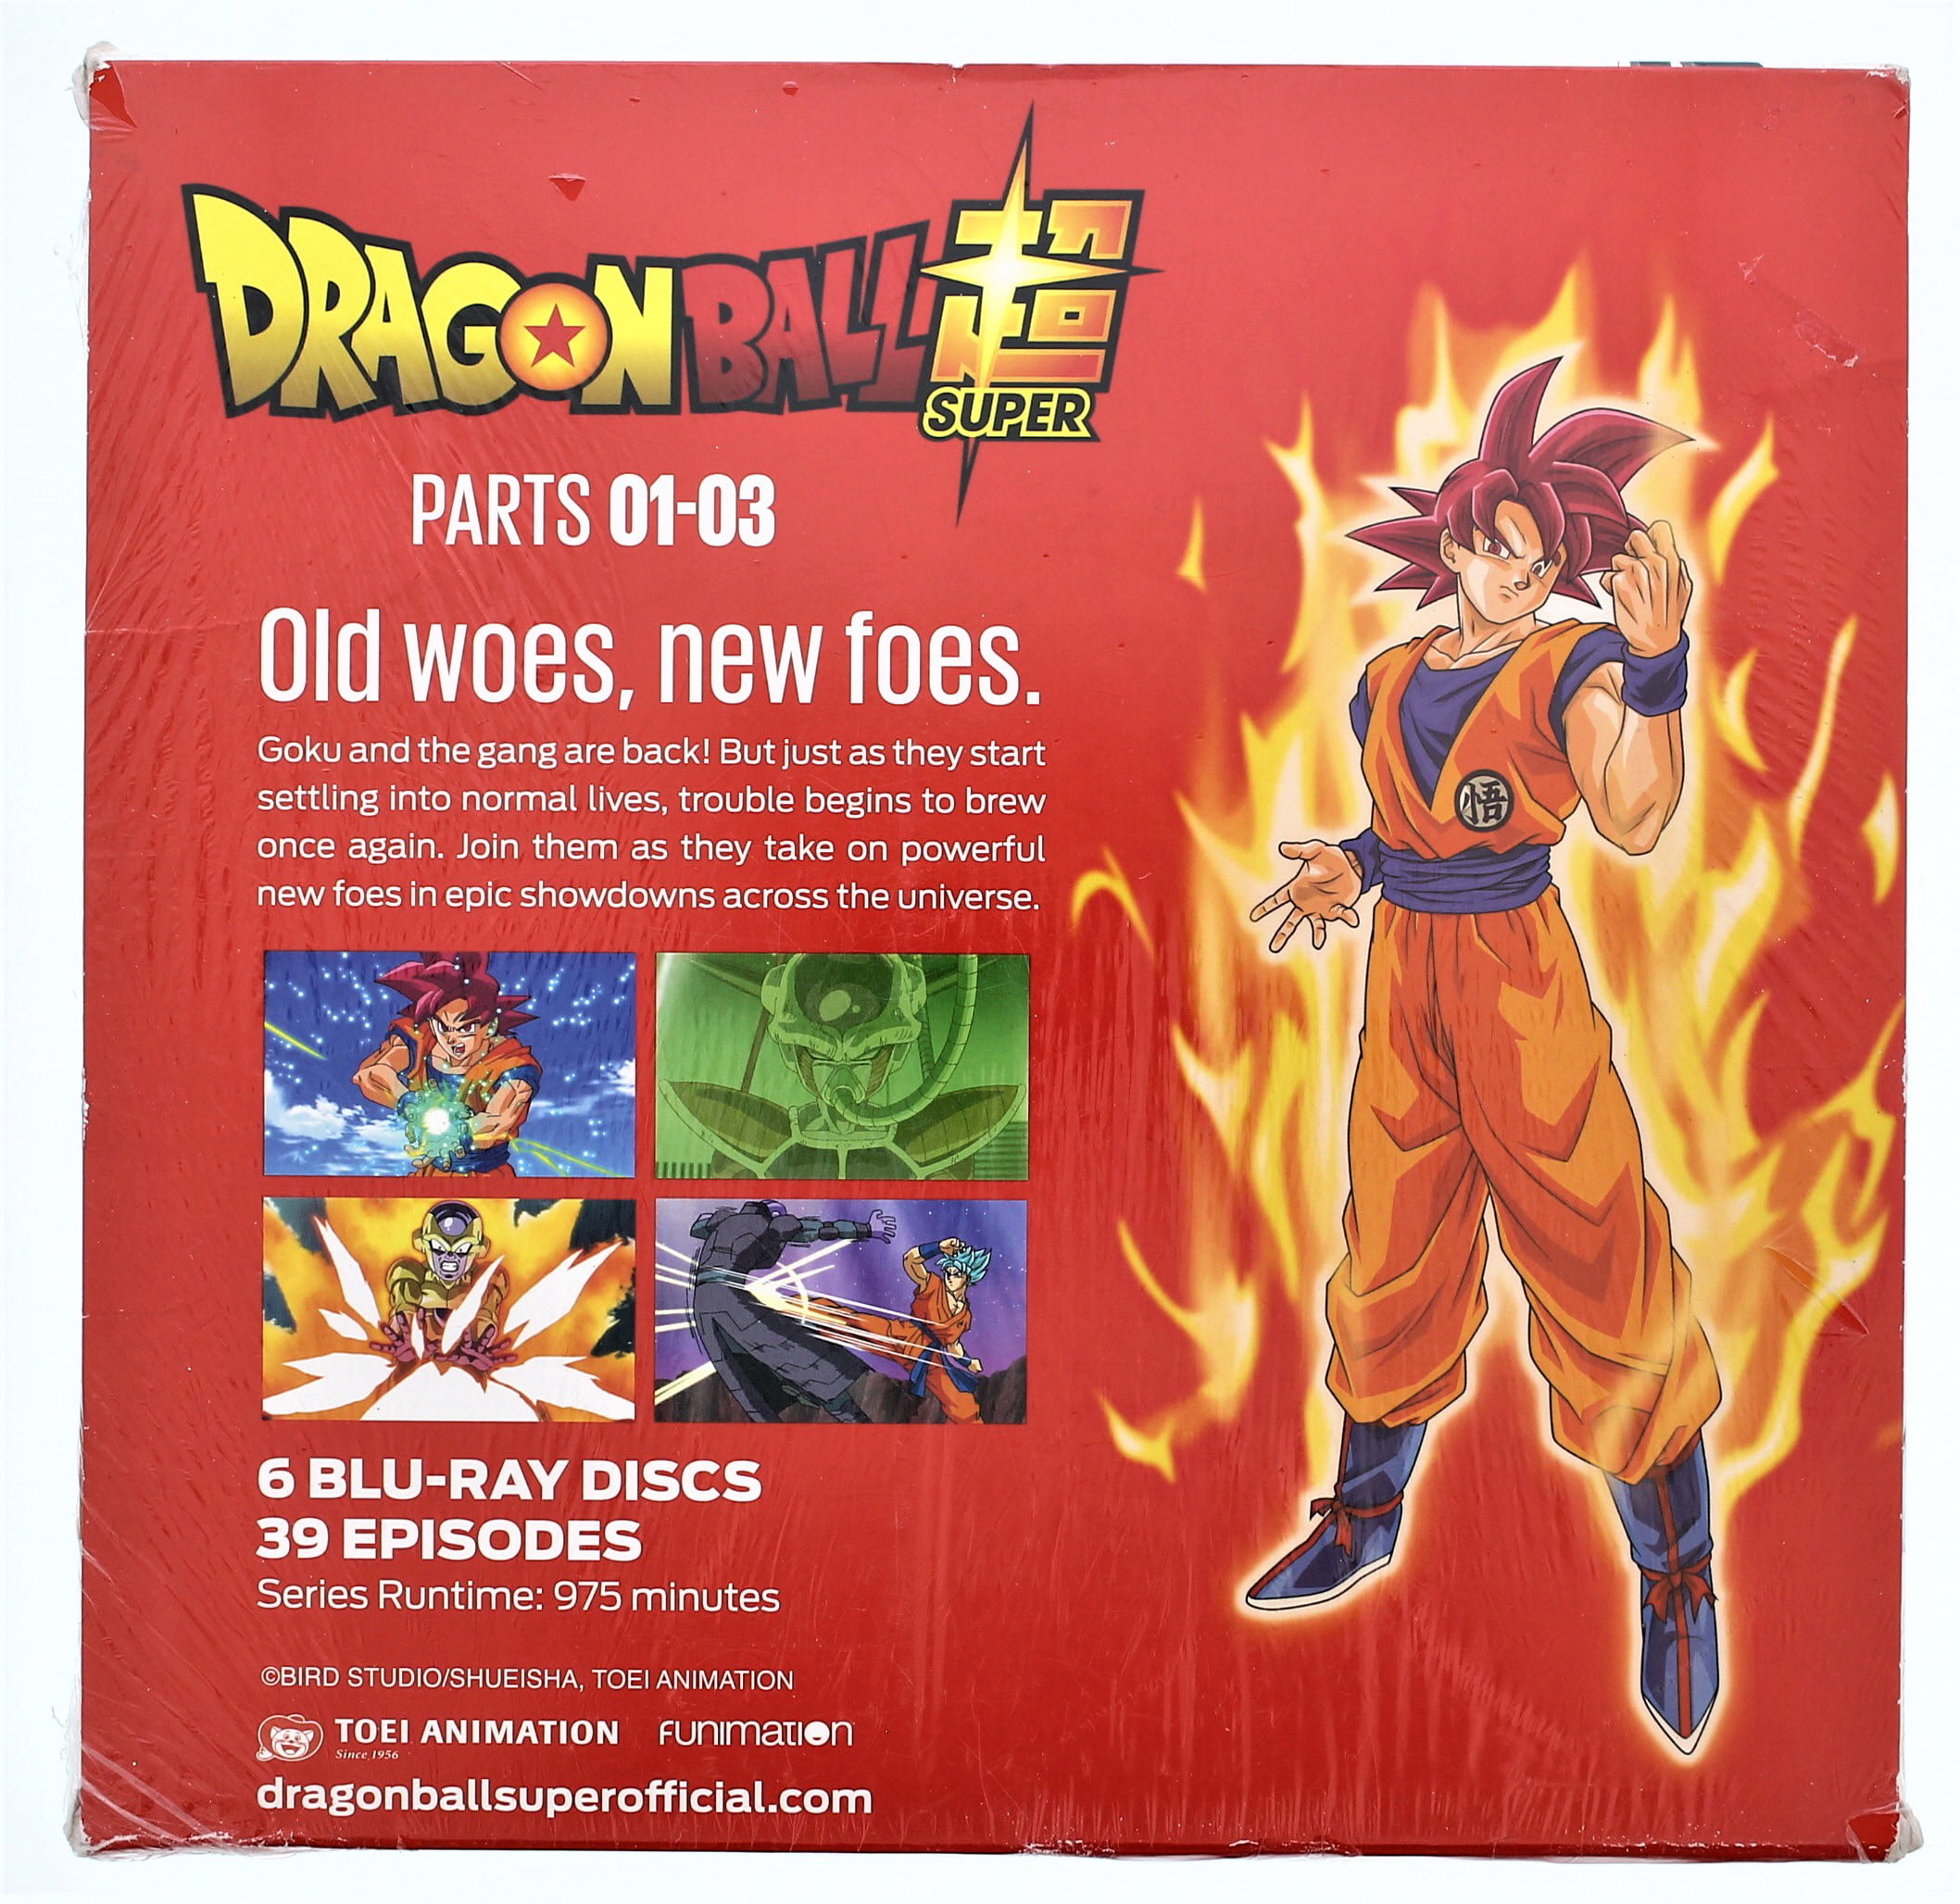 Dragon Ball Super Complete Series - DVD & Bluray Box Set - Luux Movie - The  Best DVD And Blu-Ray Store